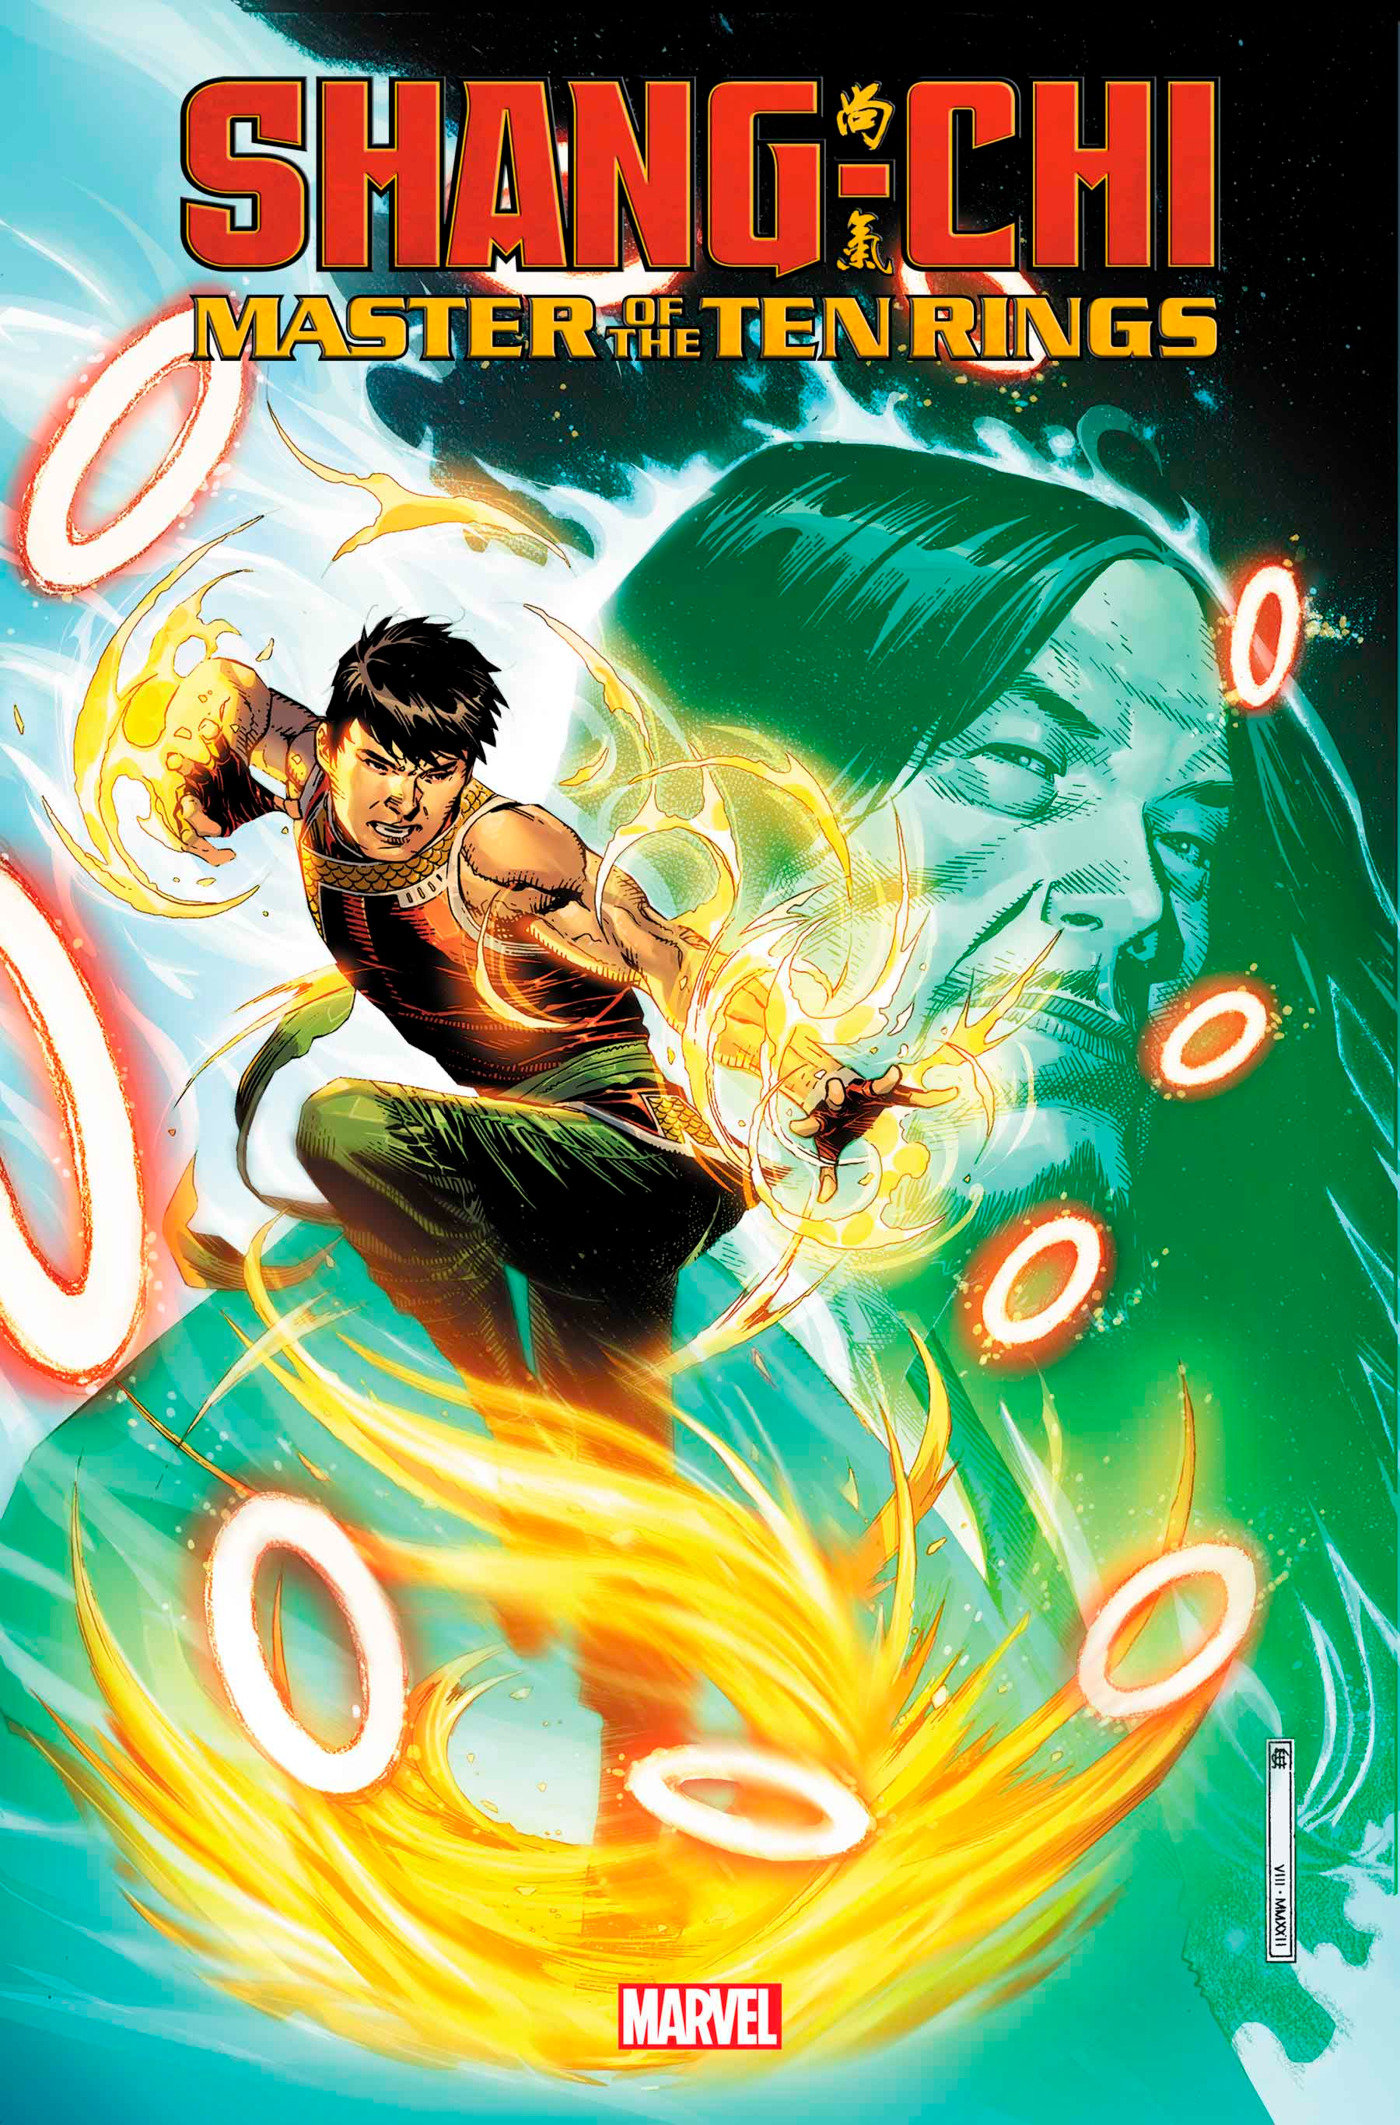 Shang-Chi Master of the Ten Rings #1 One-Shot